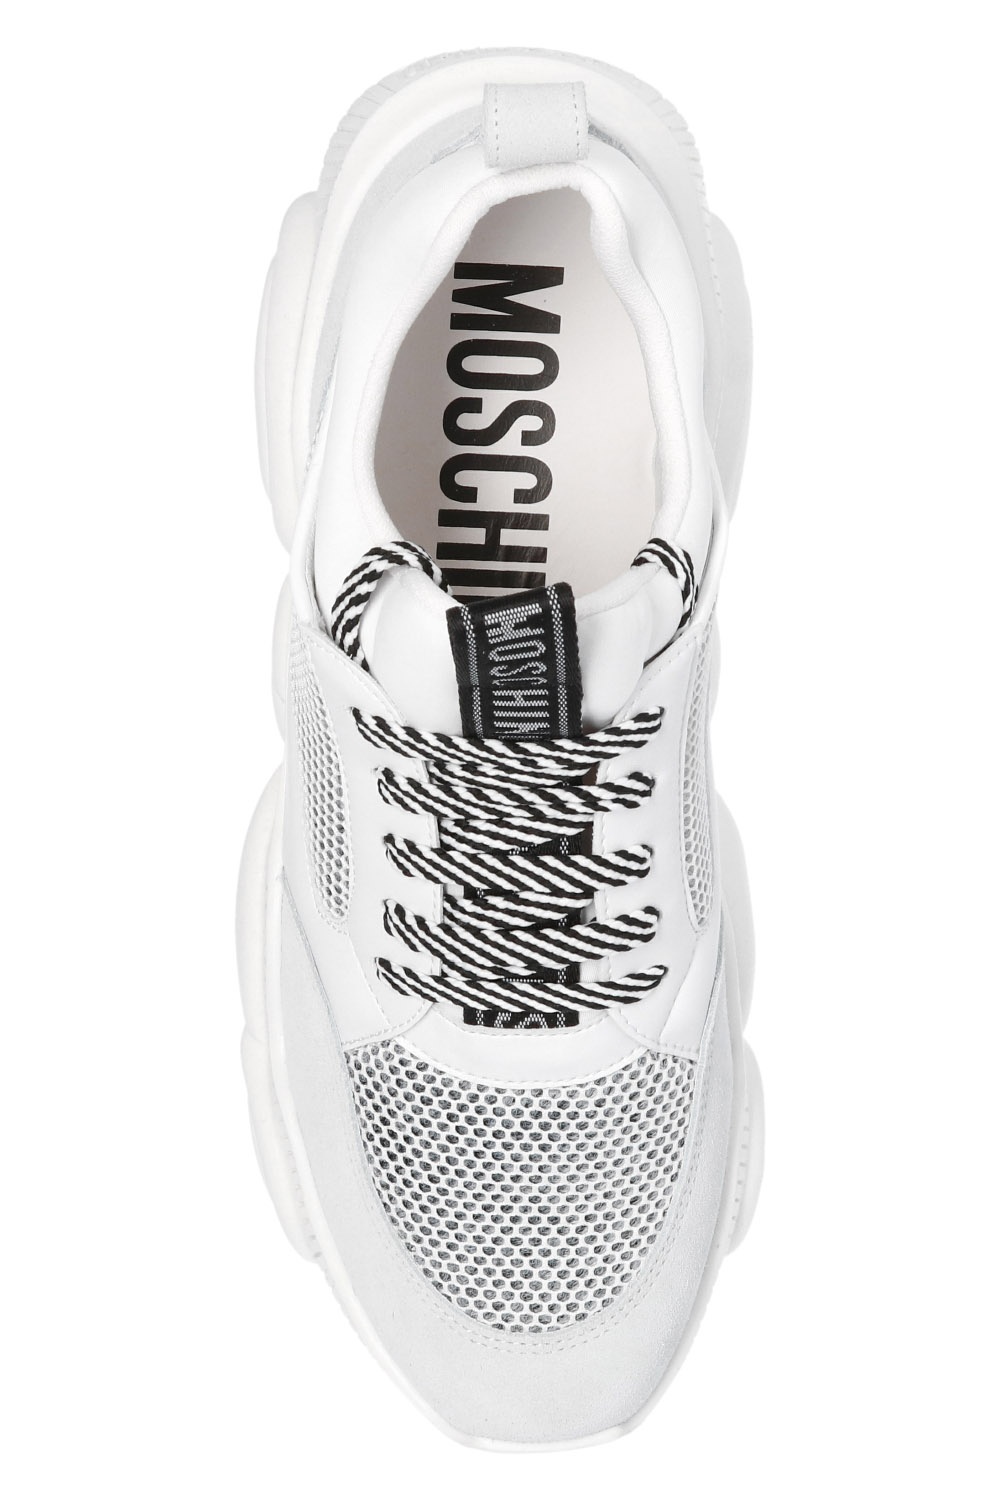 moschino teddy shoes white